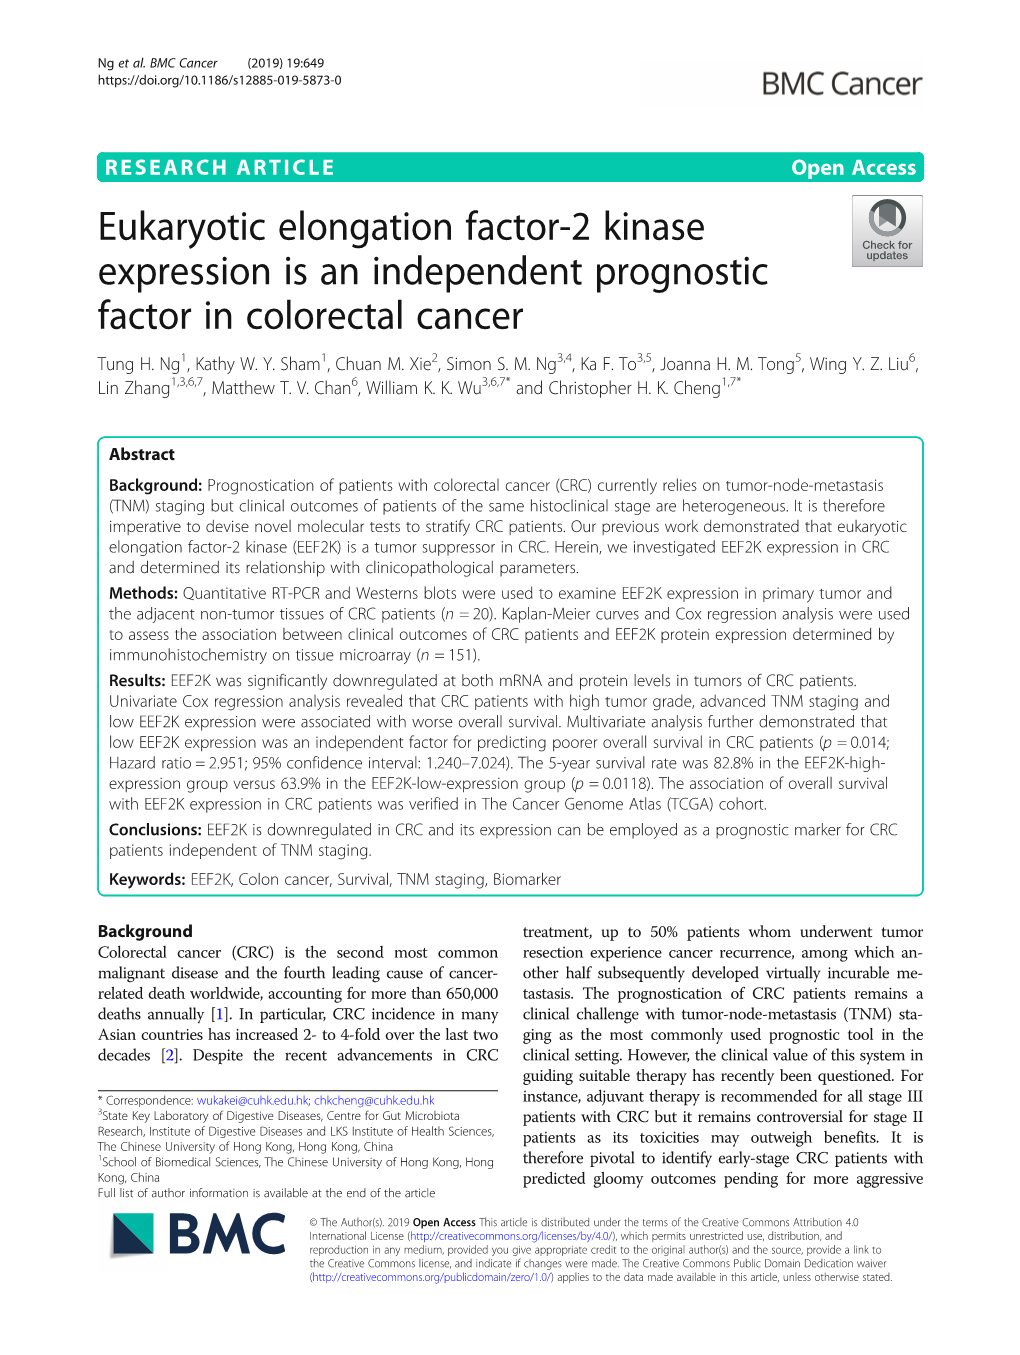 Eukaryotic Elongation Factor-2 Kinase Expression Is an Independent Prognostic Factor in Colorectal Cancer Tung H